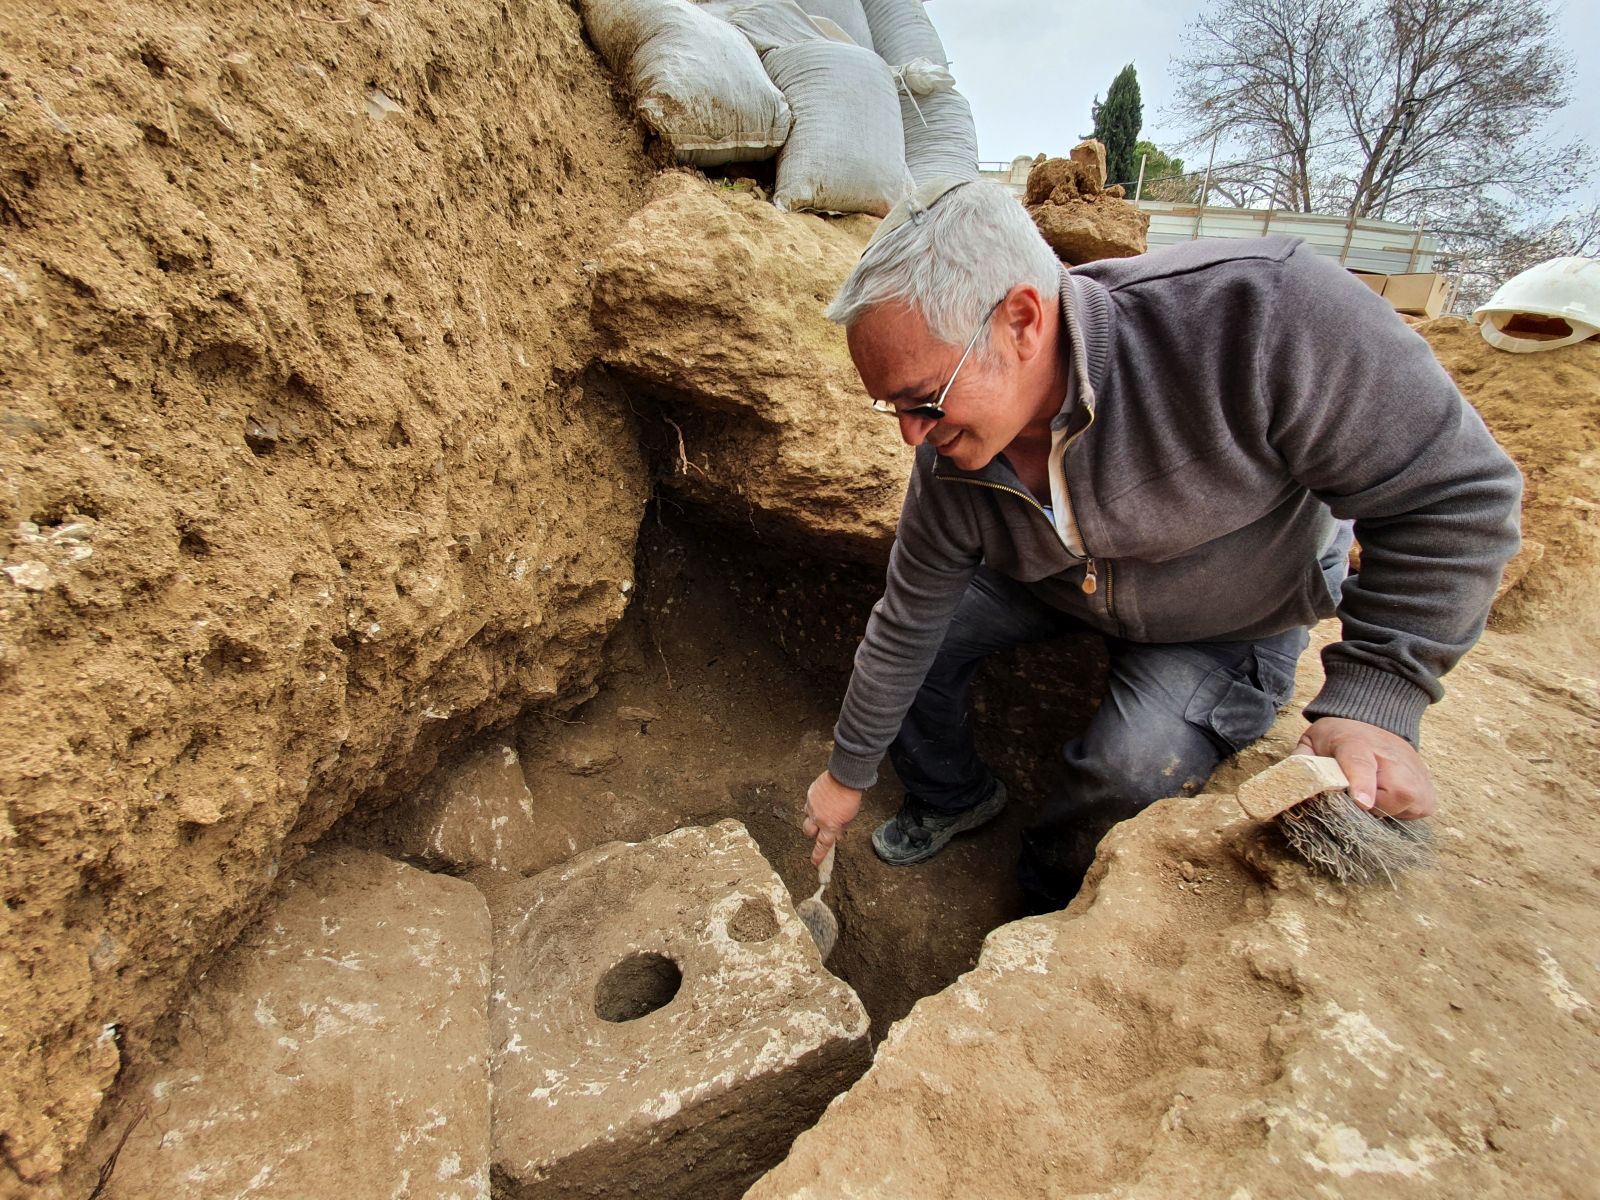 Archeologist Yaakov Billig of the Israel Antiquities Authority next to the ancient toilet in Jerusalem. Photo by Yoli Schwartz/IAA